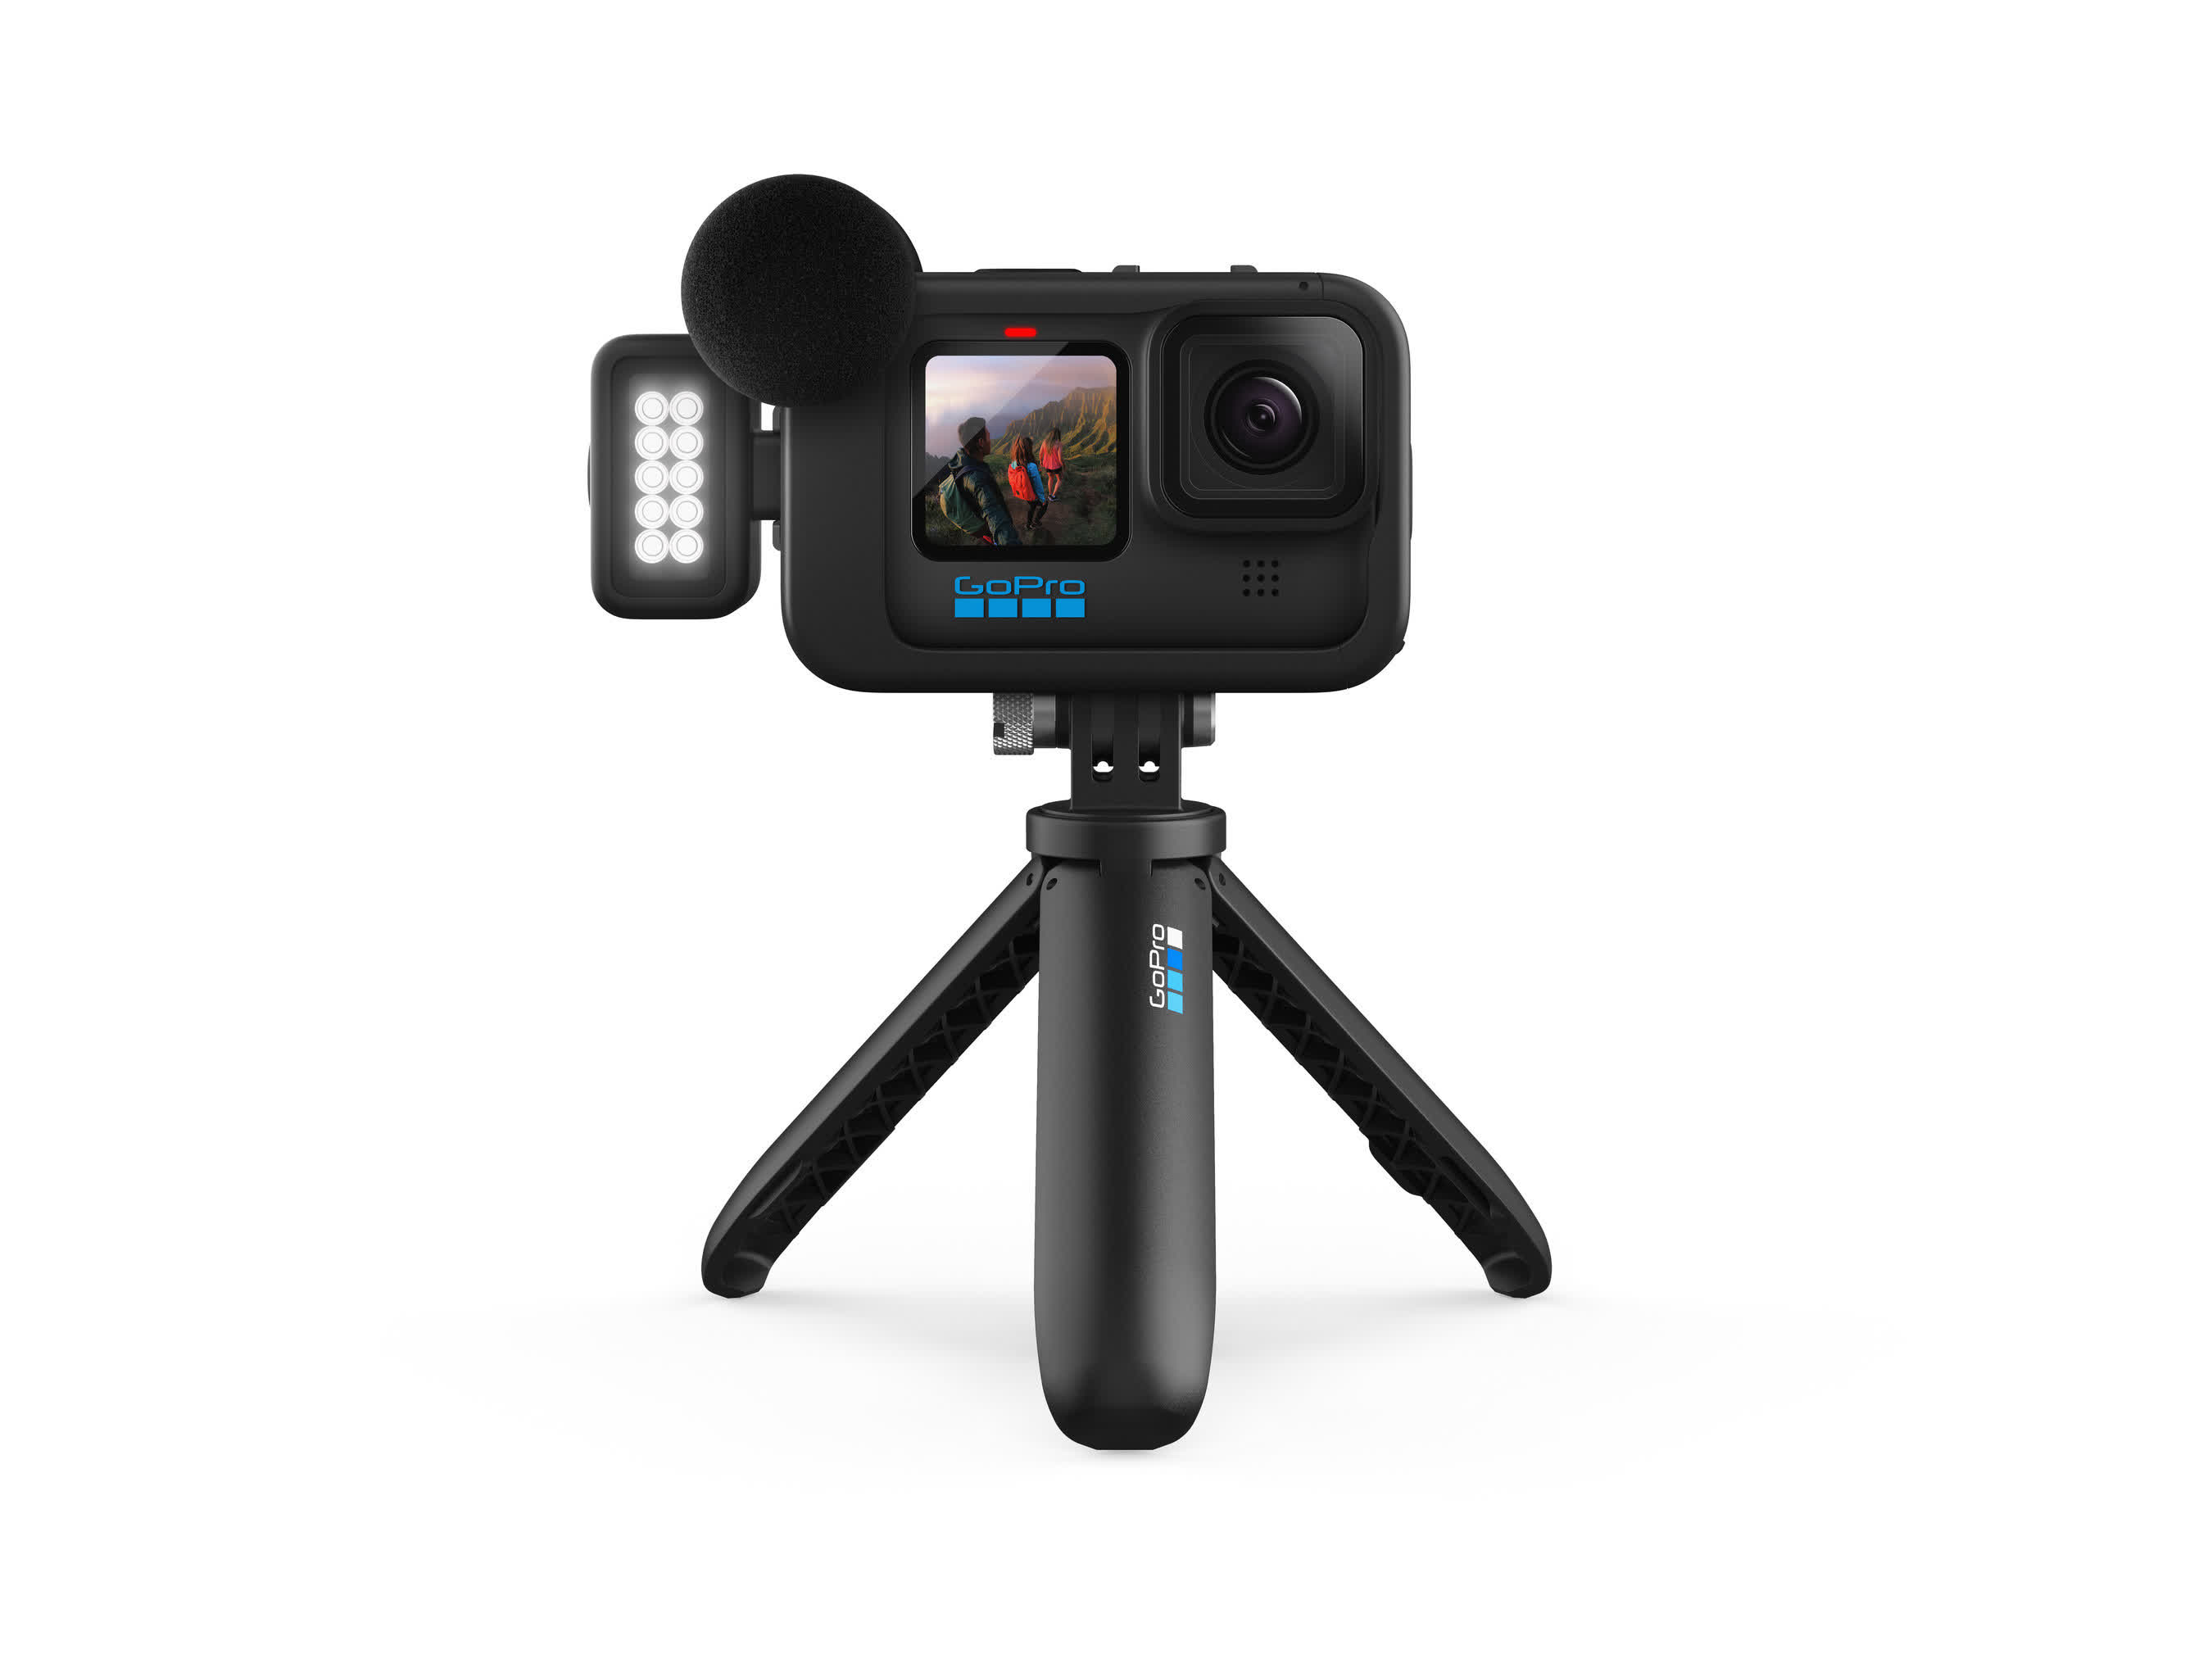 GoPro announces the Hero 10 Black action camera with a new 